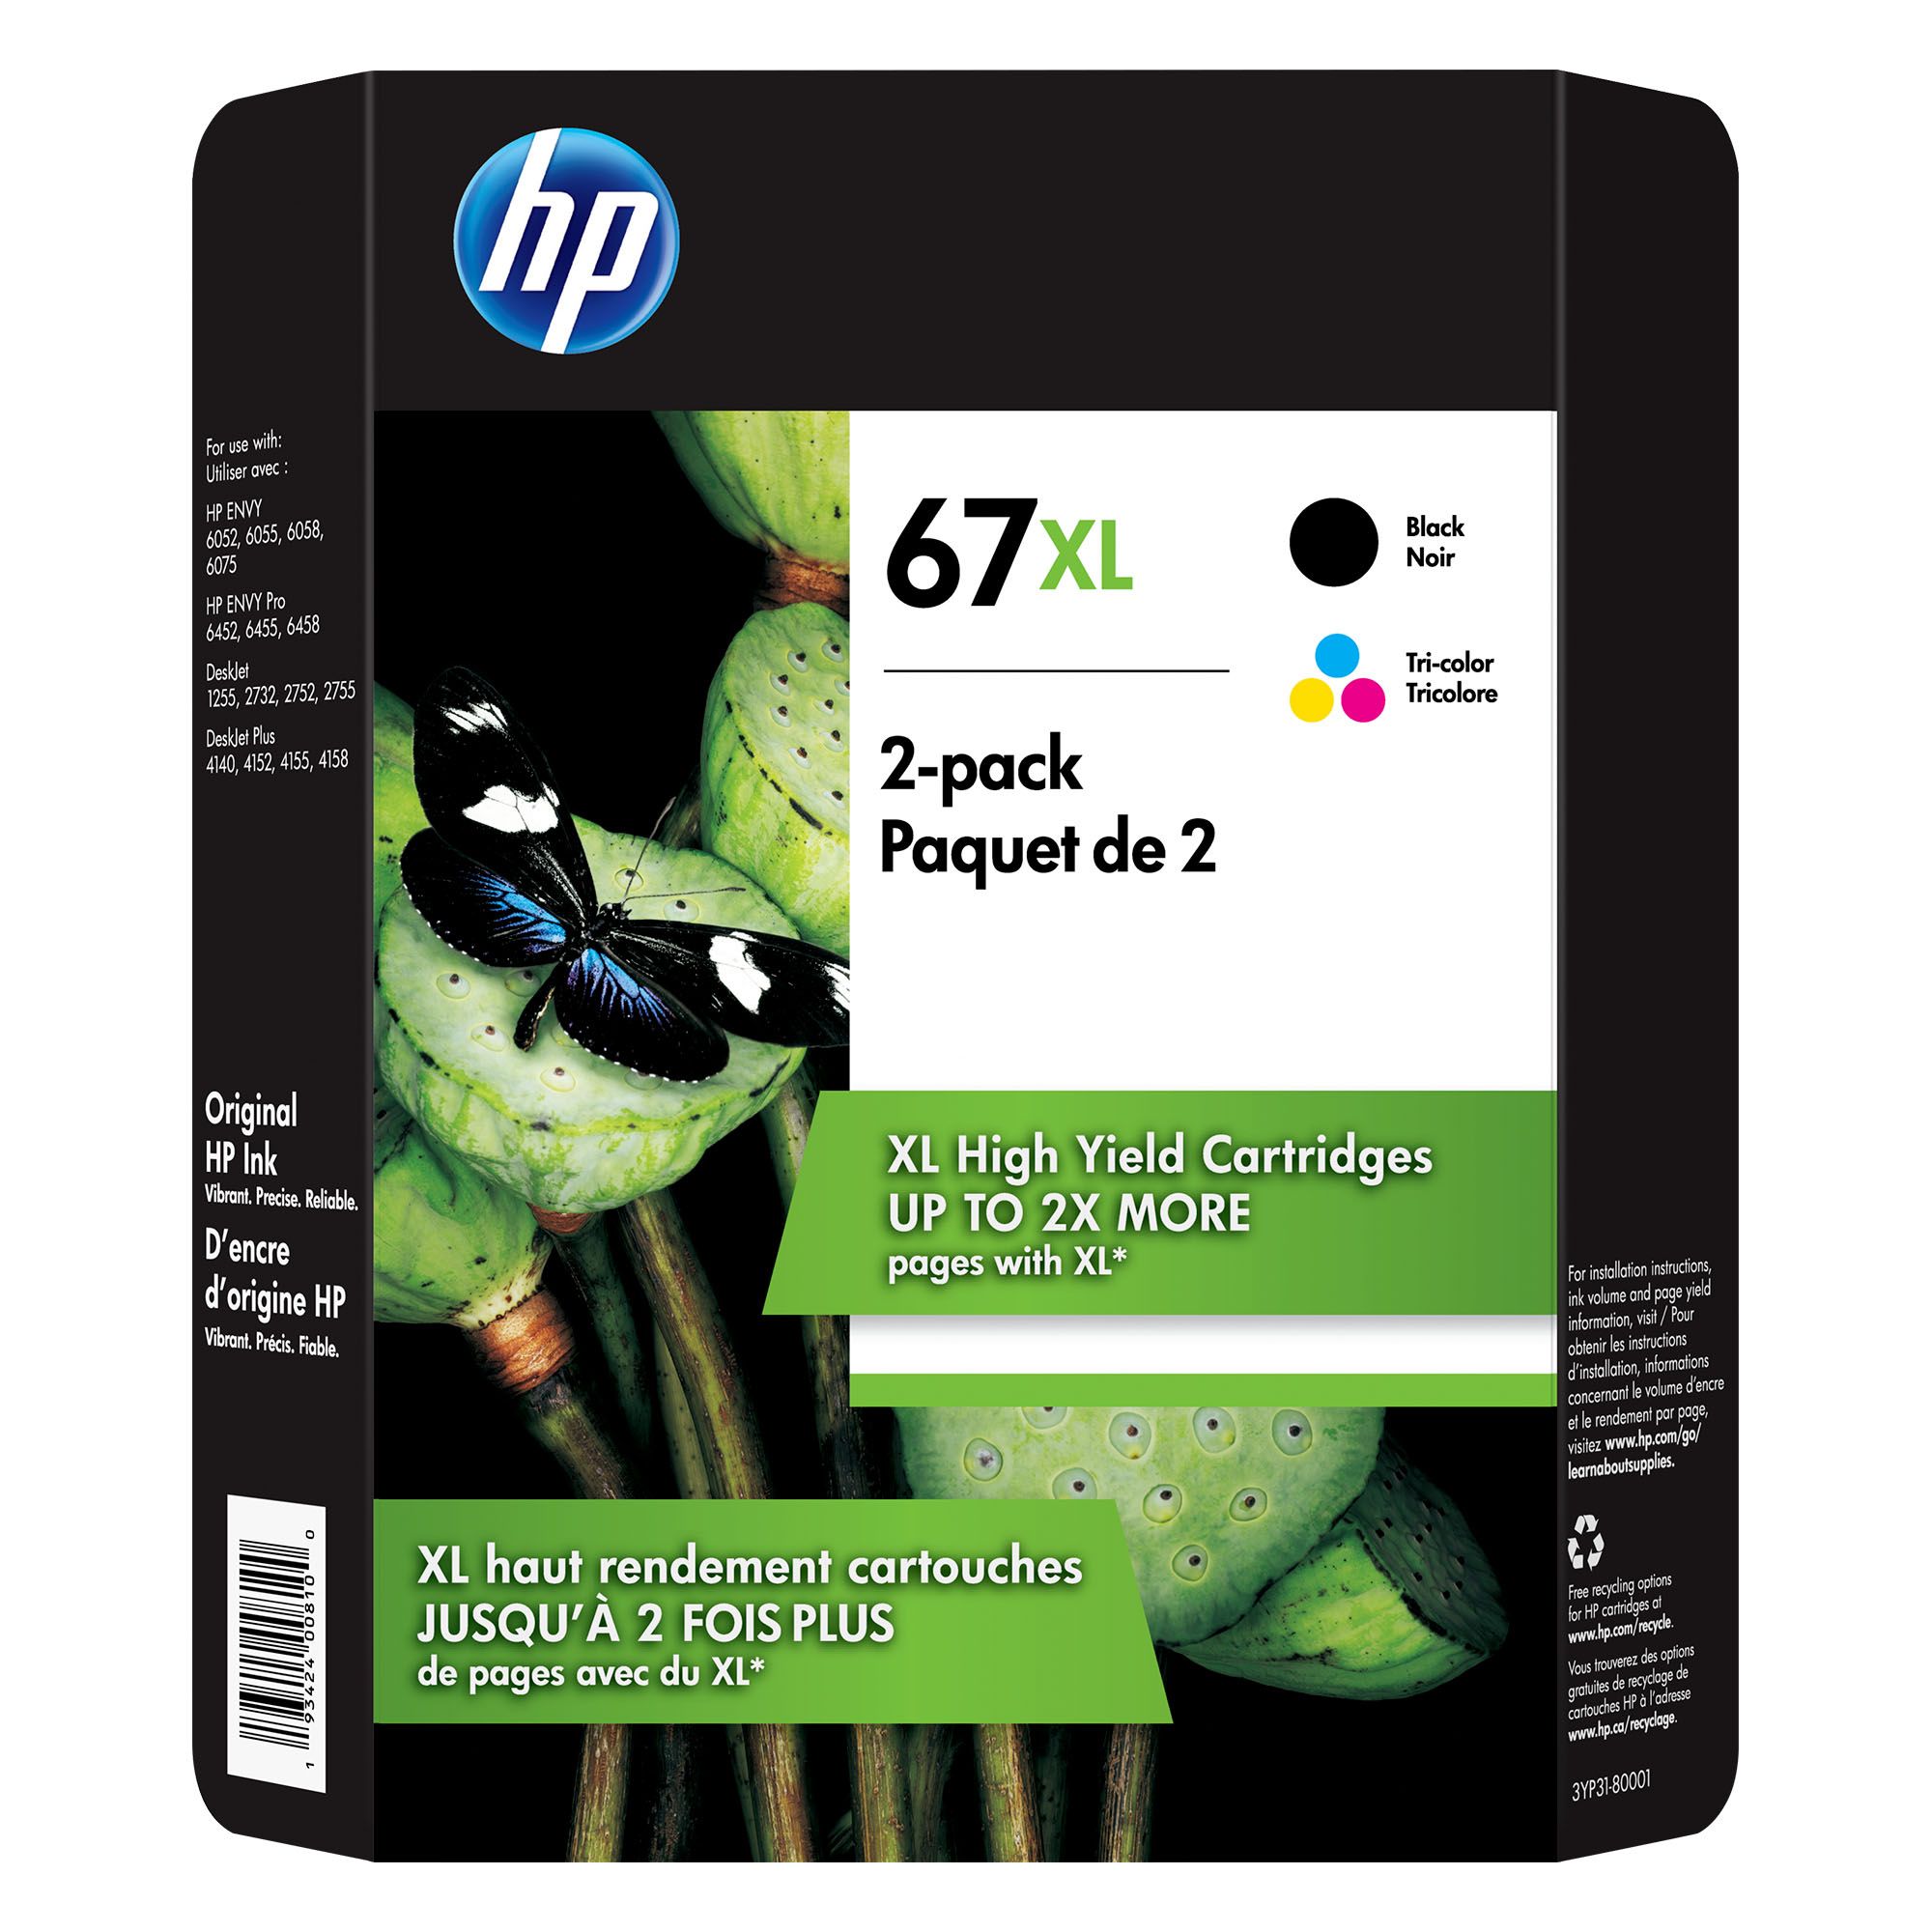 HP Inc. 67XL Color and Black Ink Cartridges, 2 pk.